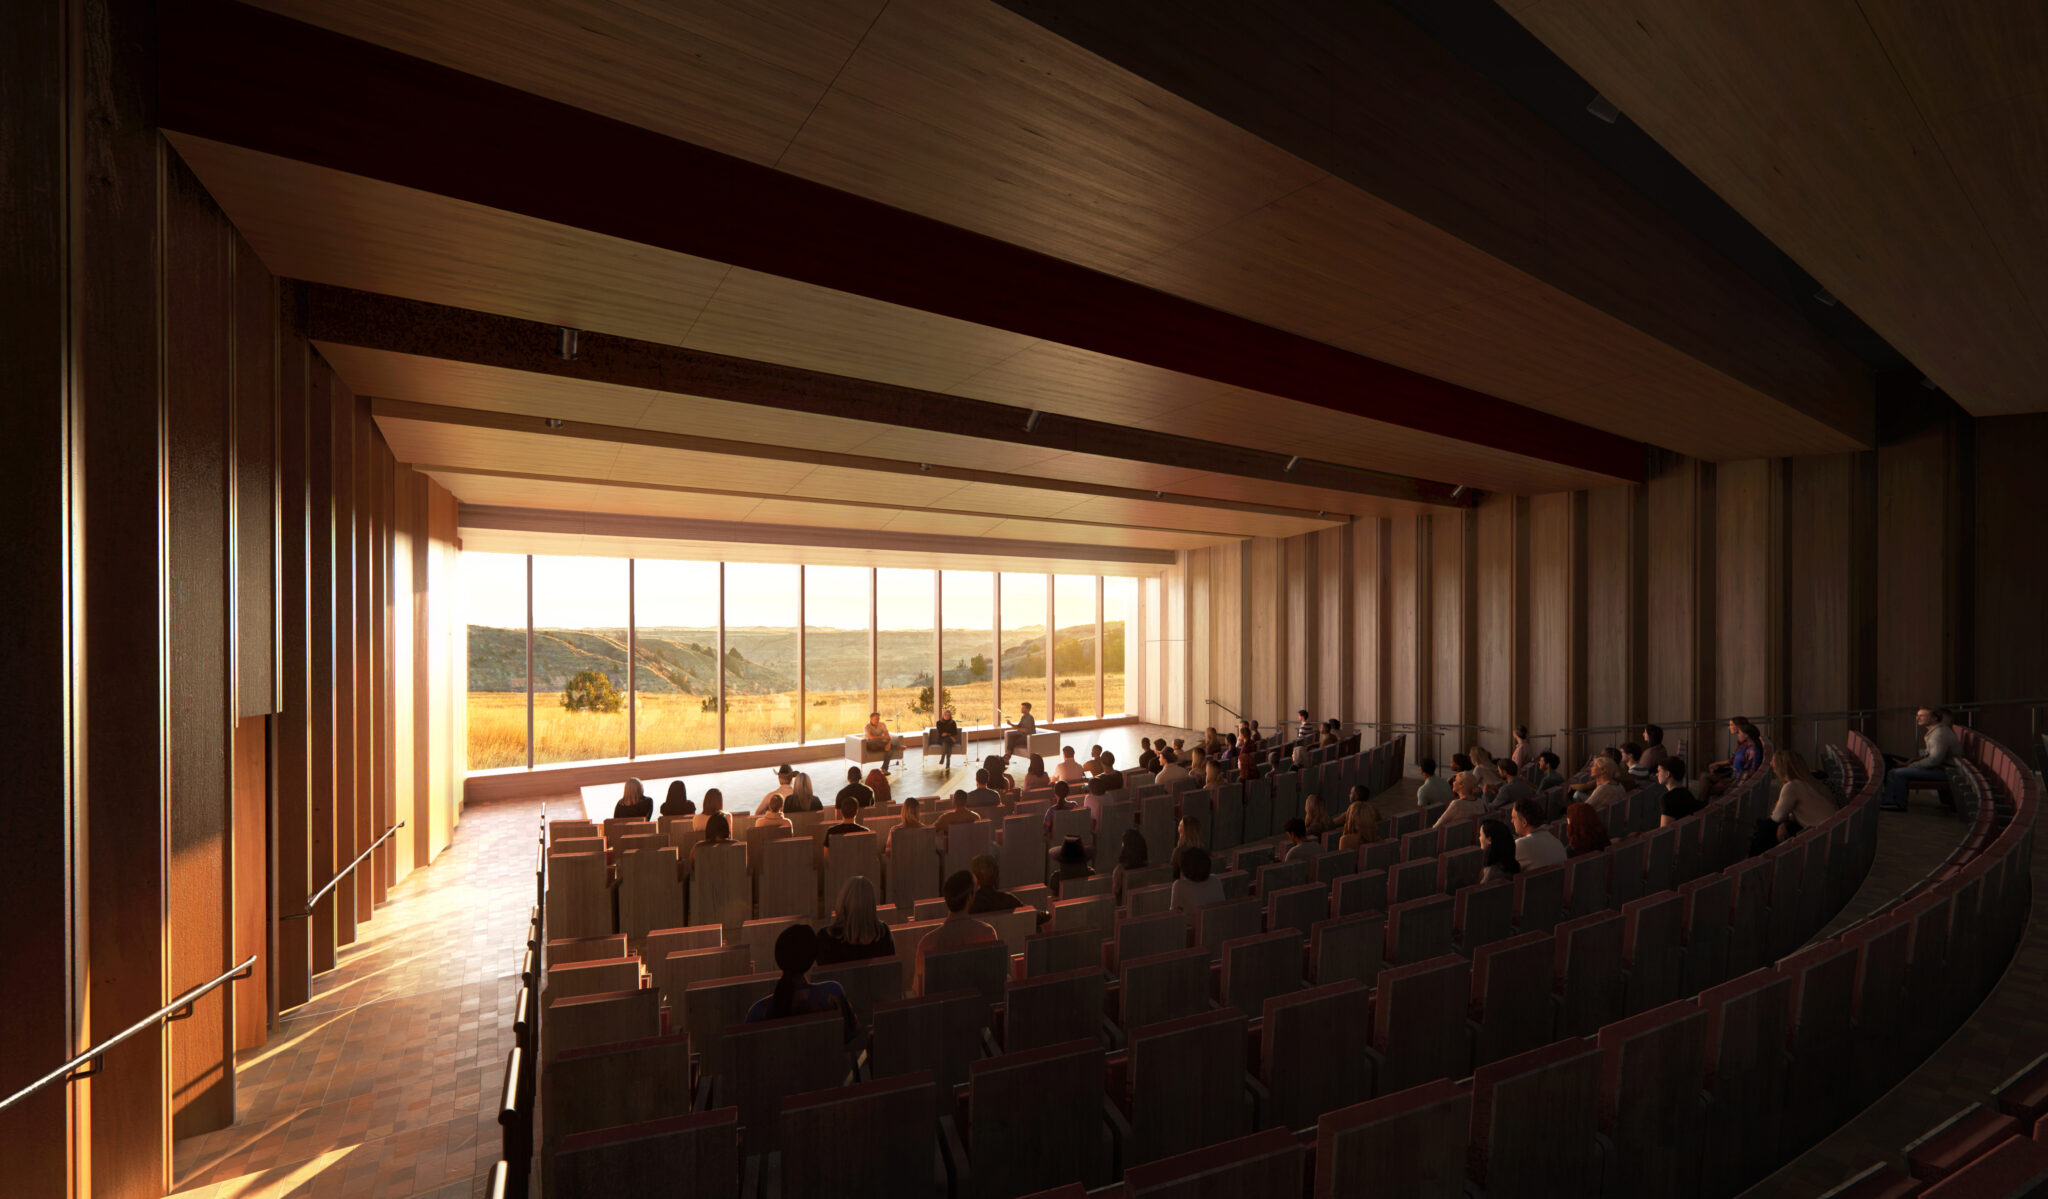 Theodore Roosevelt Presidential Library - JLG Architects in collaboration with Snohetta - Image by Snohetta